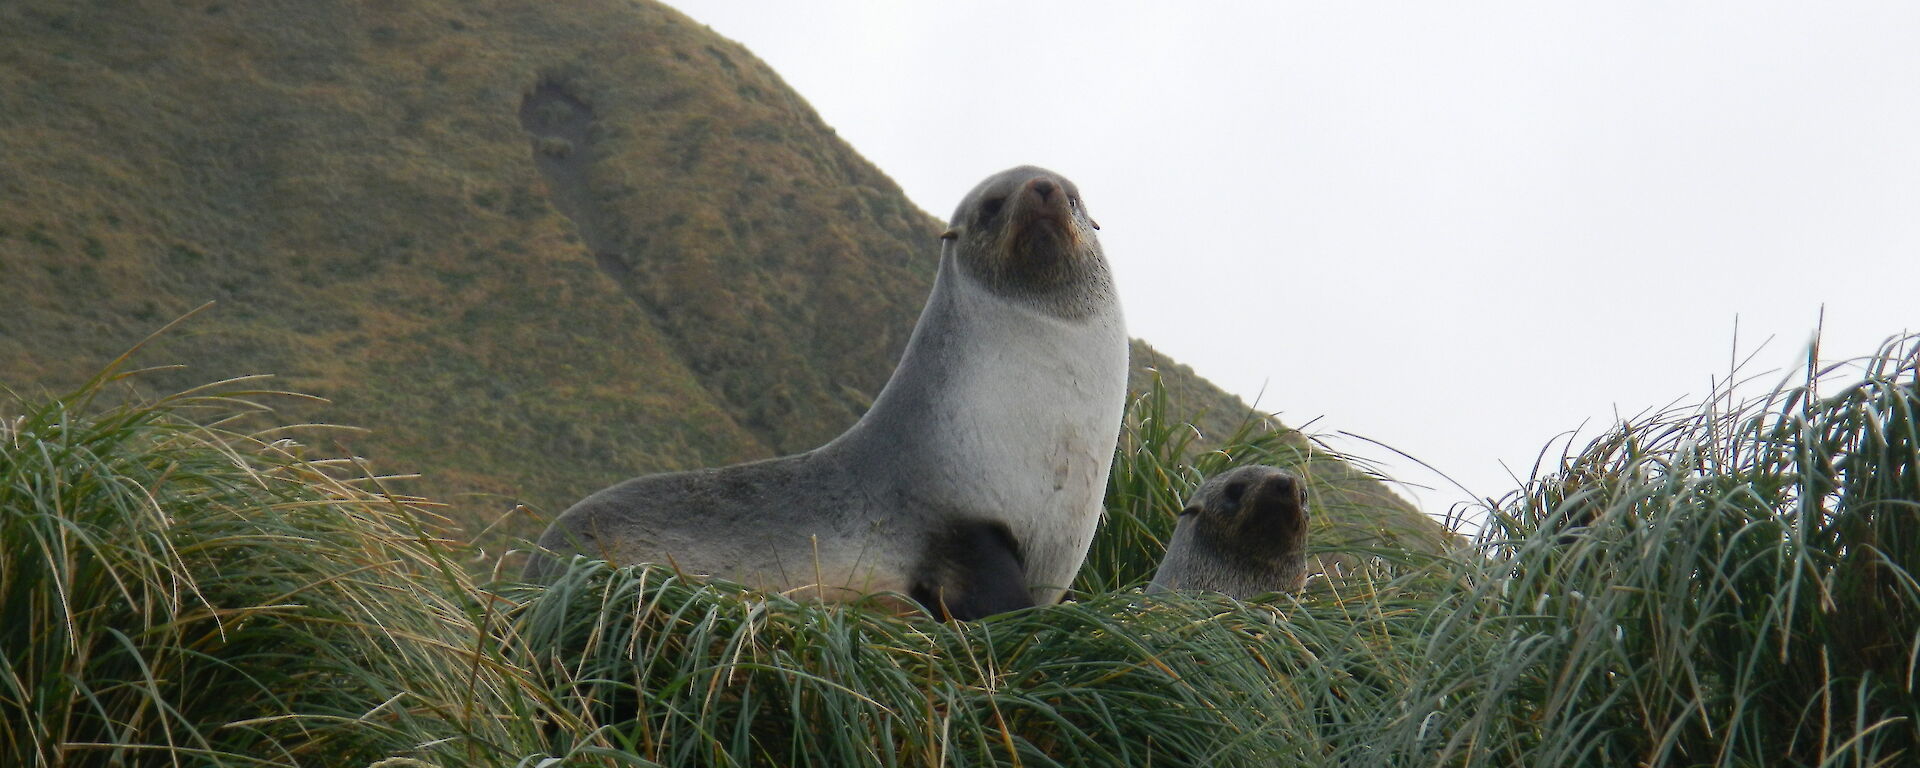 Sea lions on the tussock grass